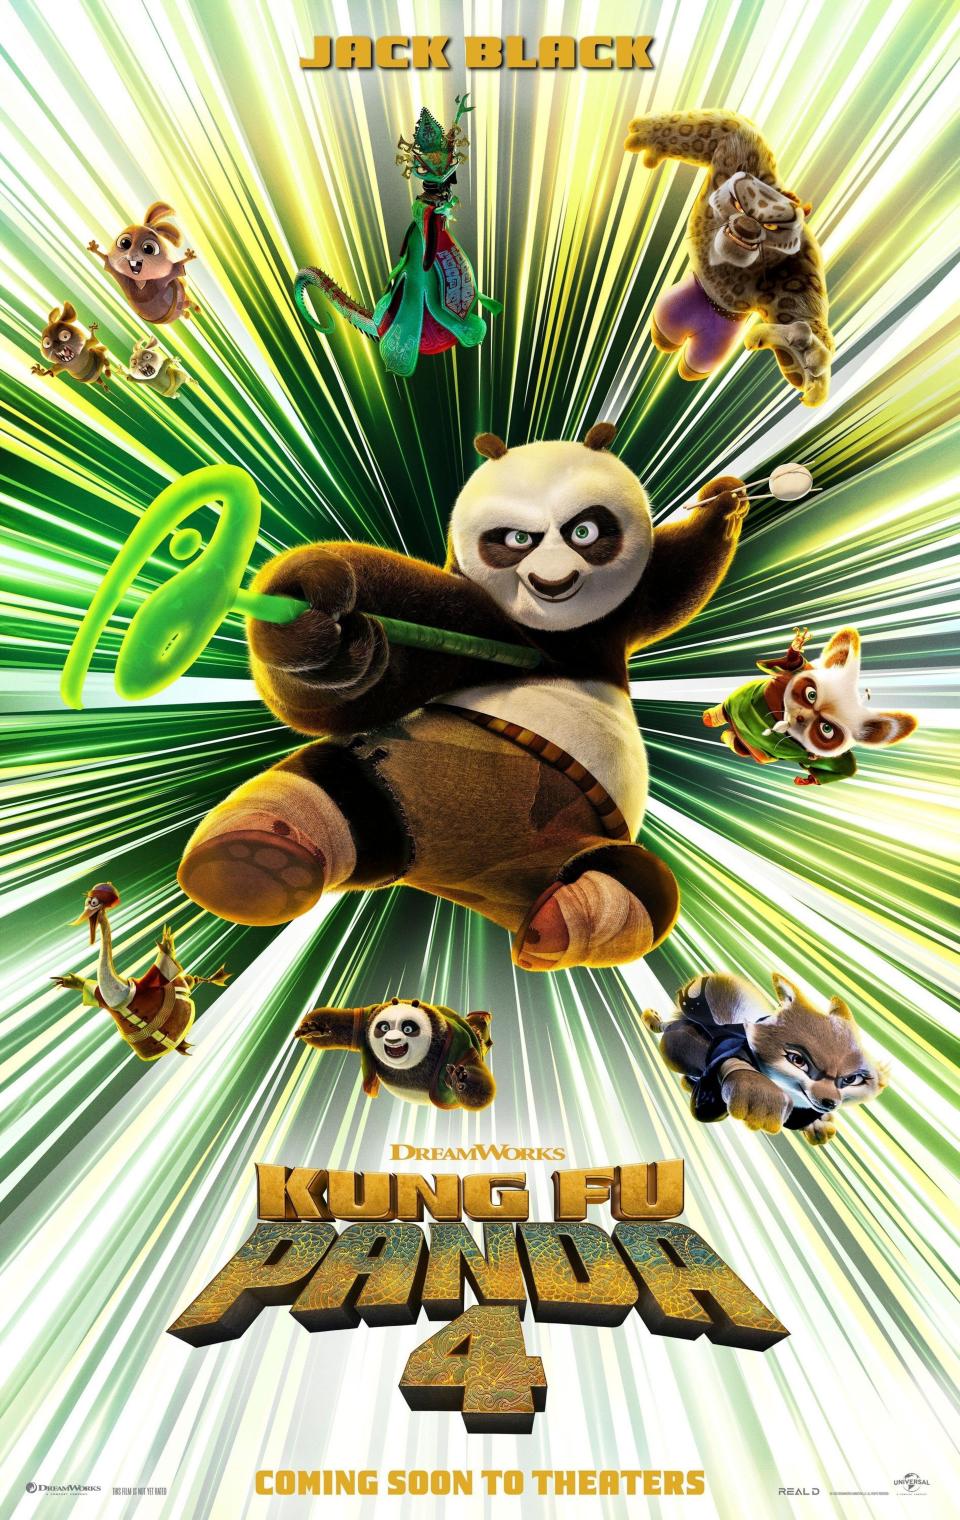 Kung Fu Panda 4 (2024) directed by Mike Mitchell and Stephanie Stine and starring Jack Black, Awkwafina and Viola Davis. After Po is tapped to become the Spiritual Leader of the Valley of Peace, he needs to find and train a new Dragon Warrior, while a wicked sorceress plans to re-summon all the master villains whom Po has vanquished to the spirit realm. US advance poster ***EDITORIAL USE ONLY***. Credit: BFA / Universal Pictures